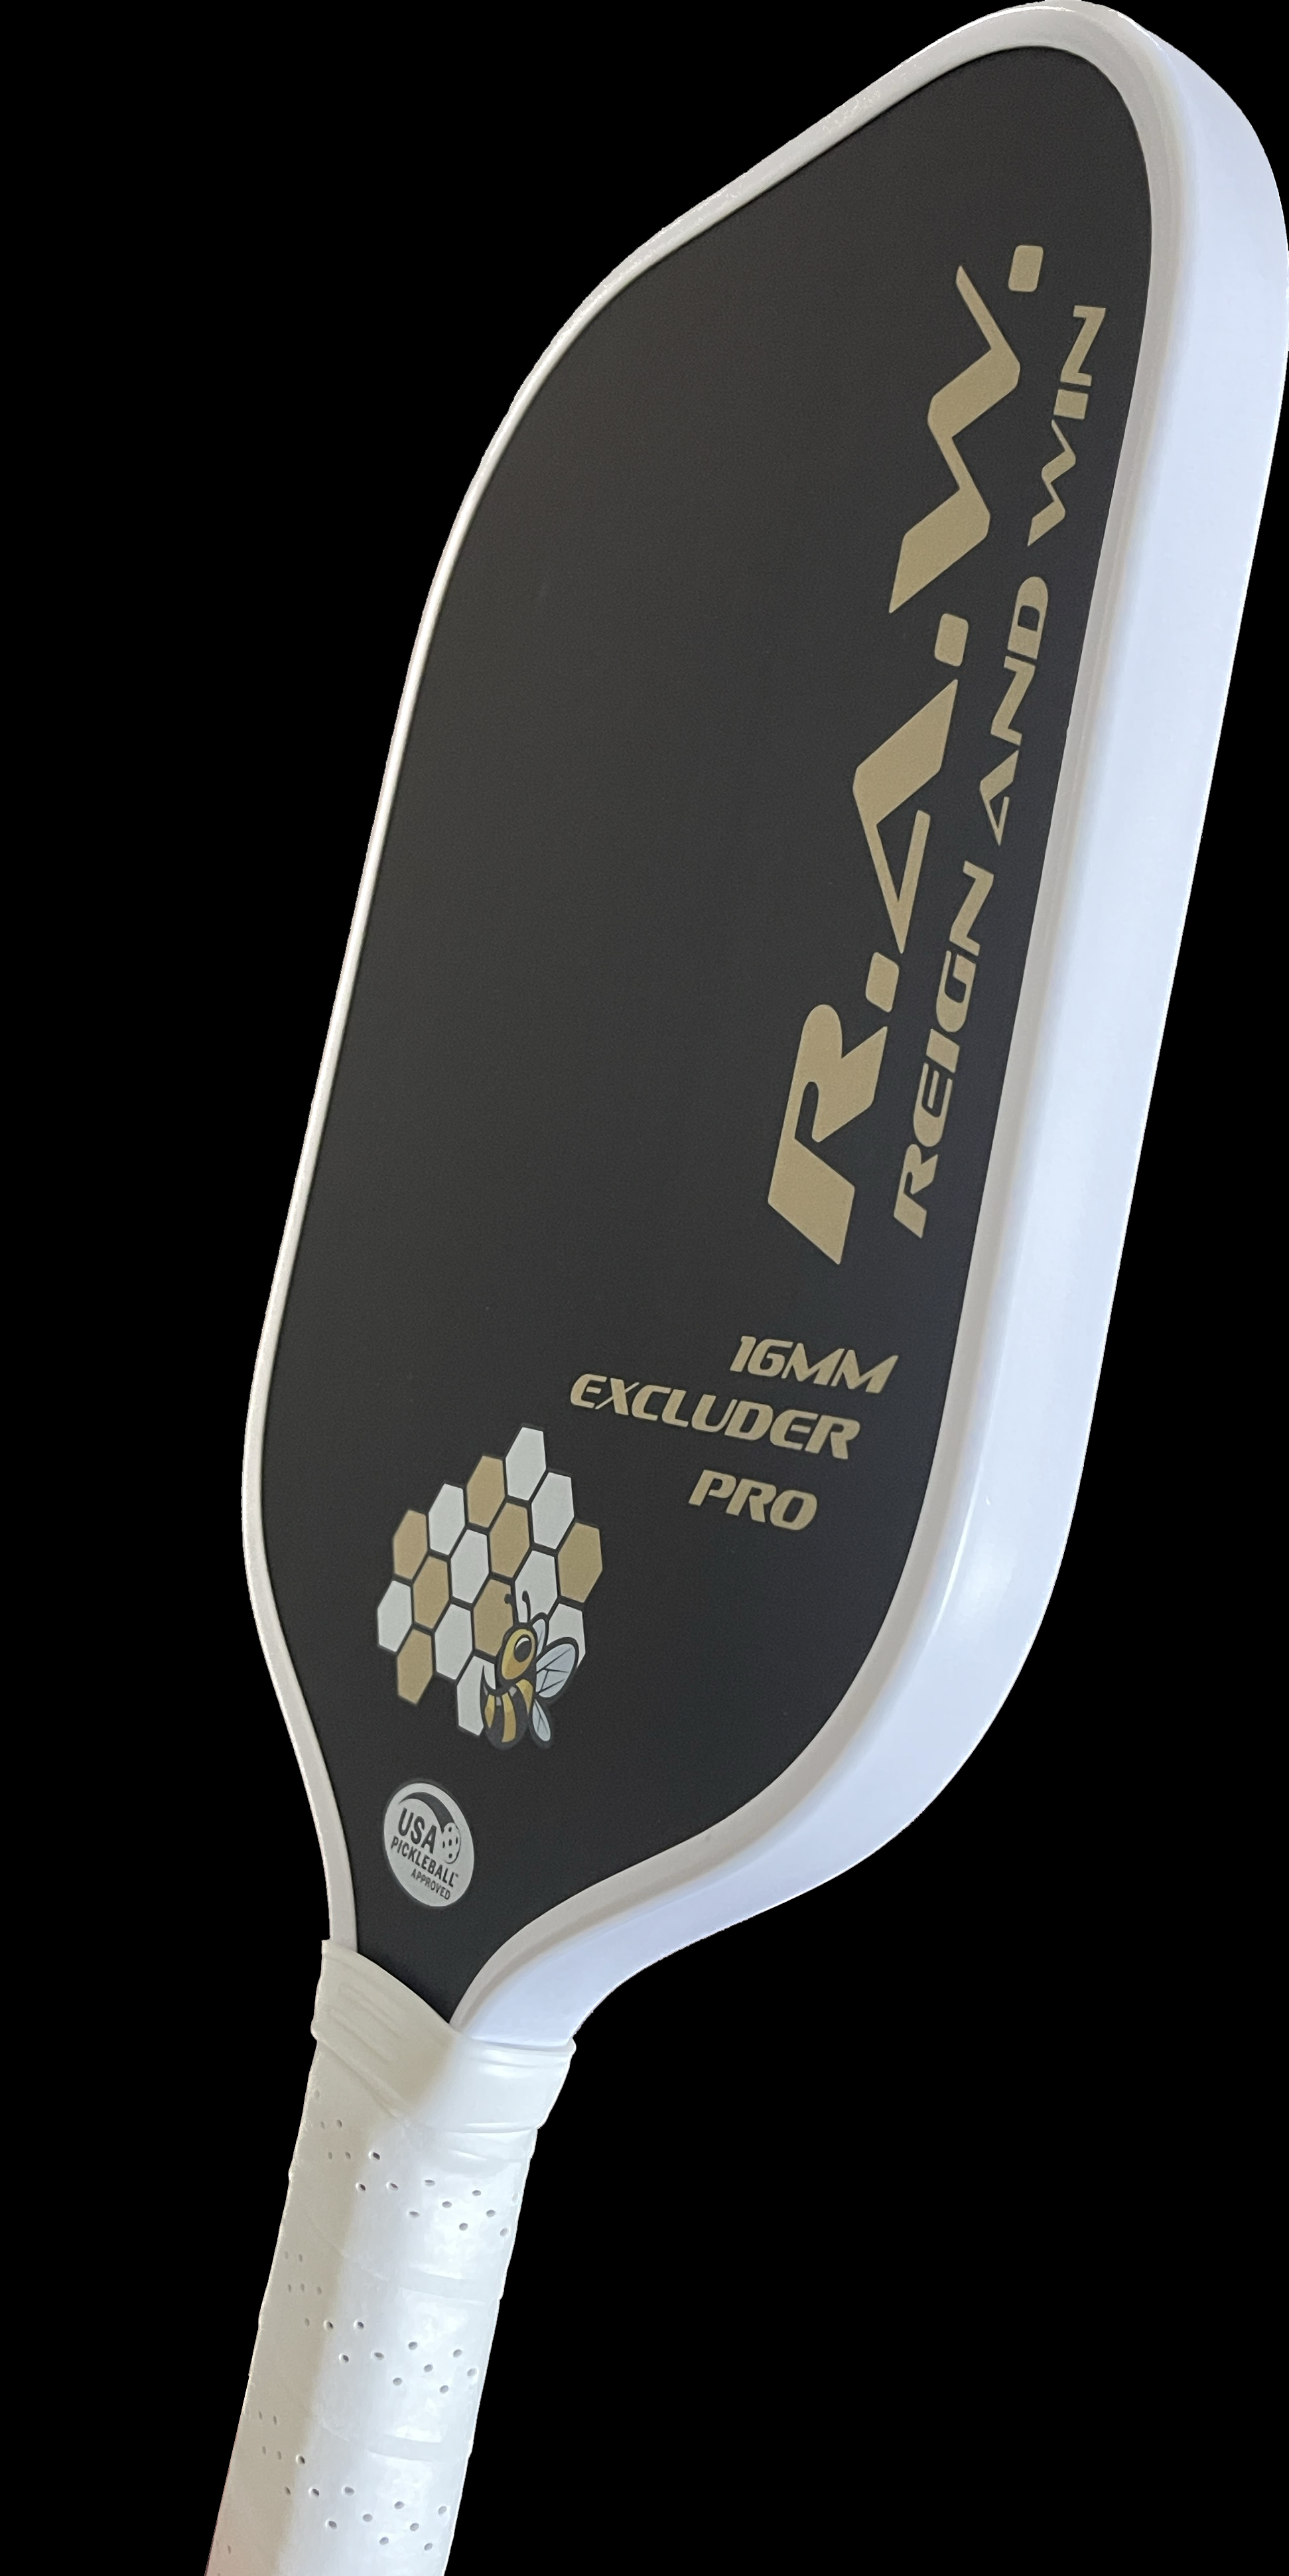 The Excluder Pro Thermoform